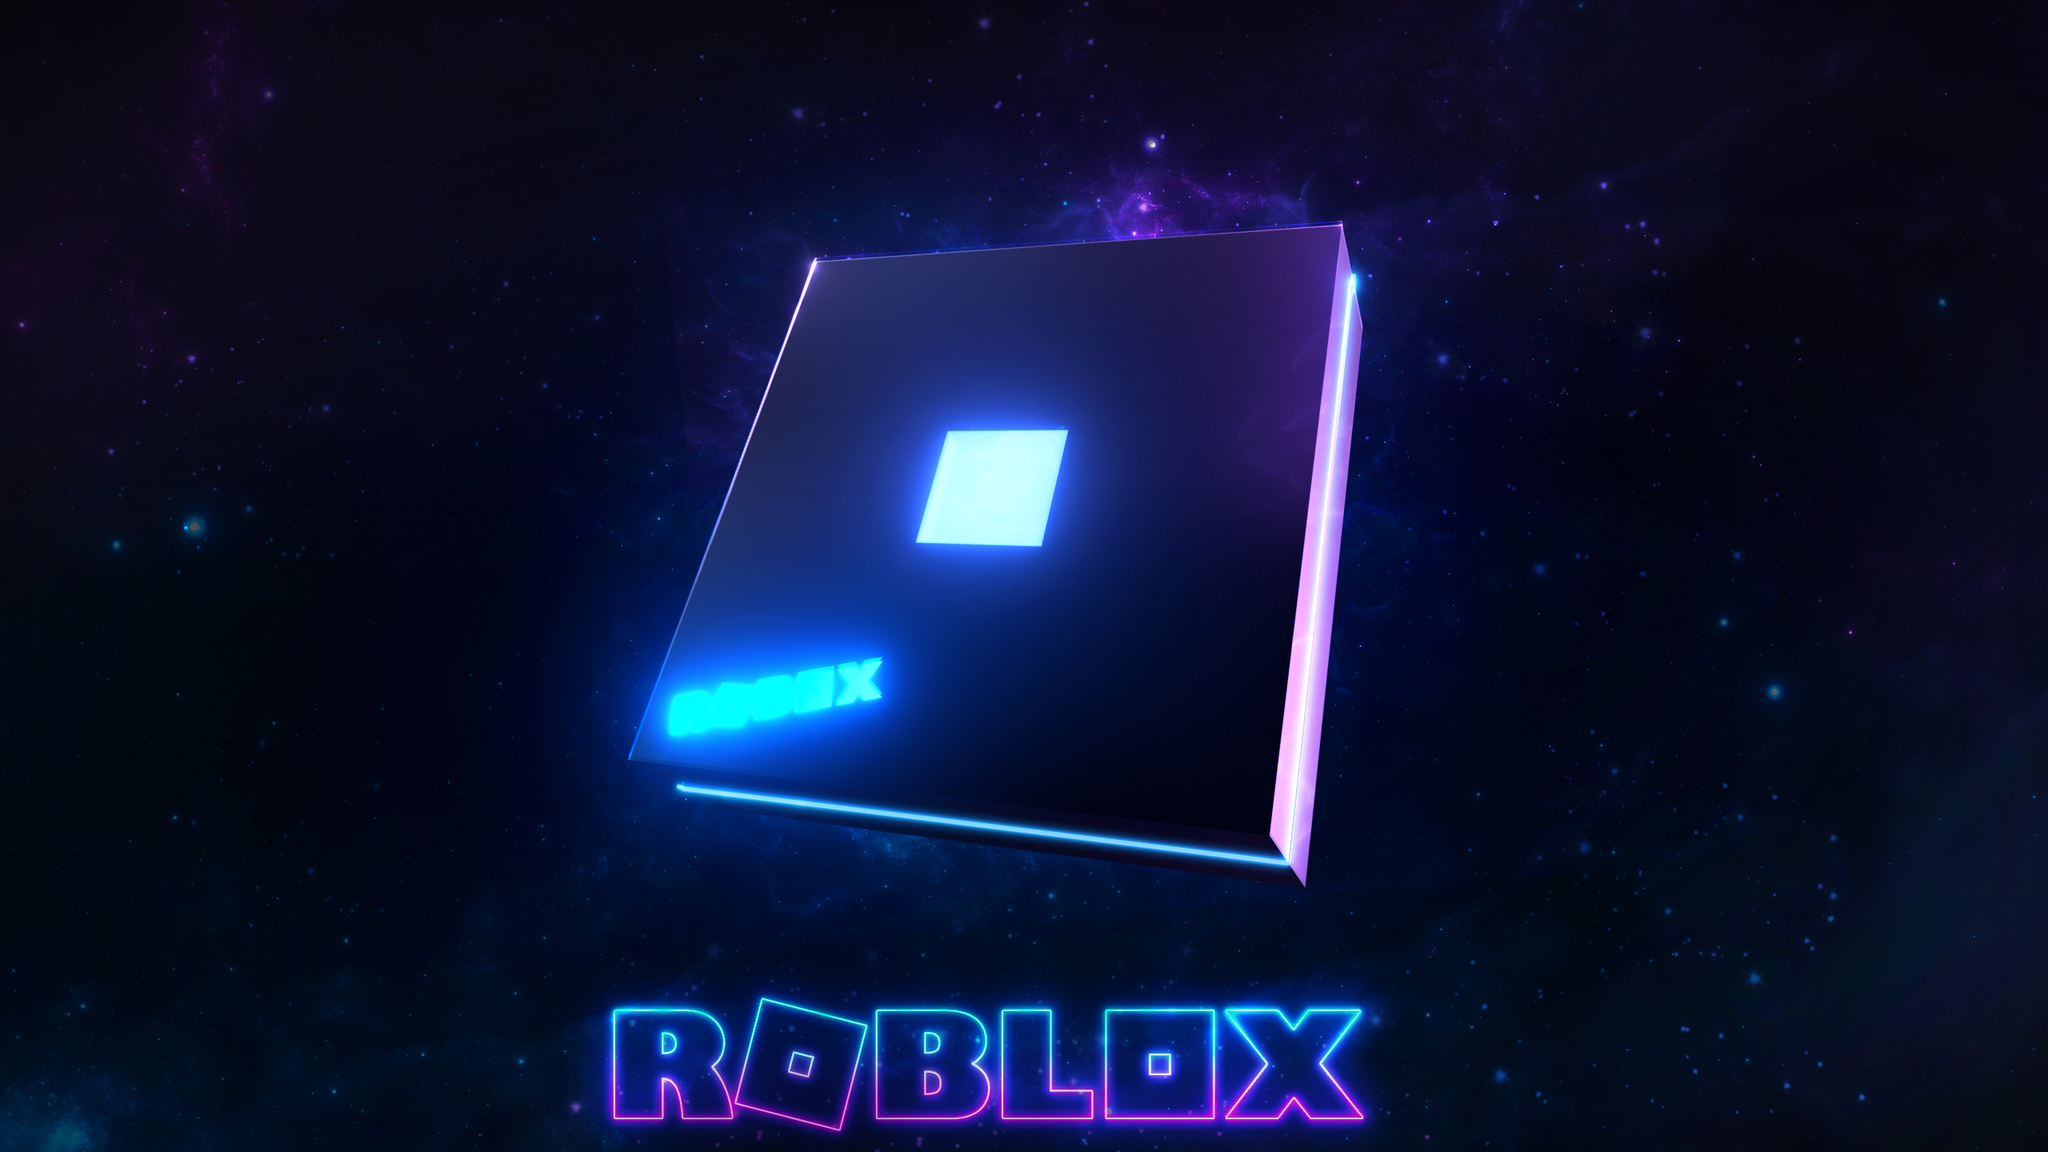 Roblox Wallpaper new tab theme background images for your desktop phone  or tablet by mohamed farchi  Goodreads